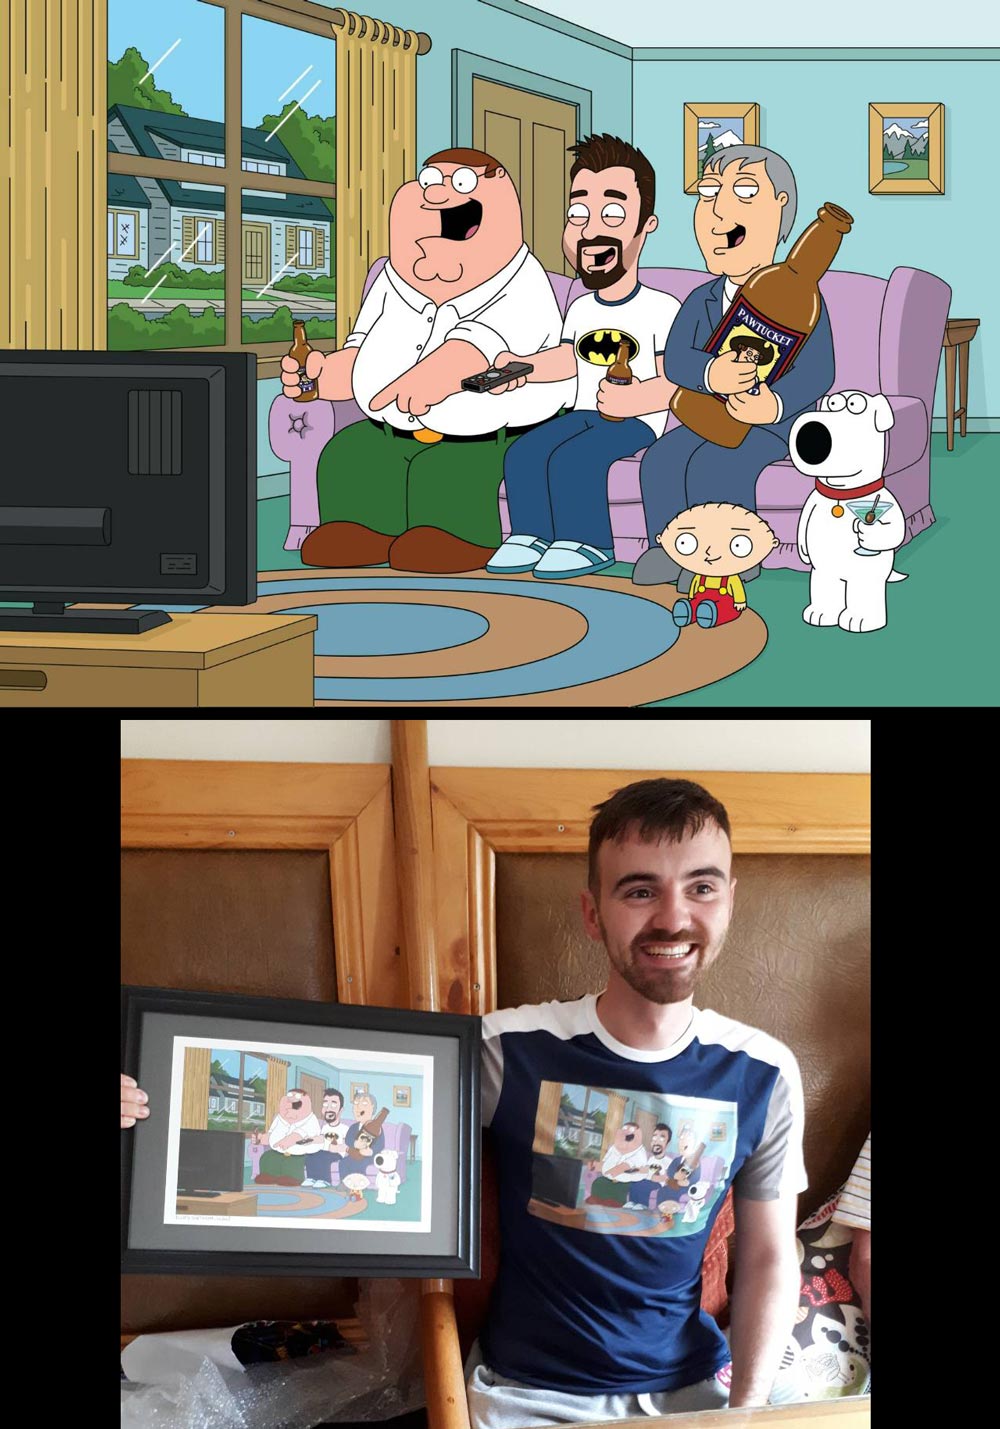 My sister is friends with a top animator at family guy. She got him to draw me for my birthday!